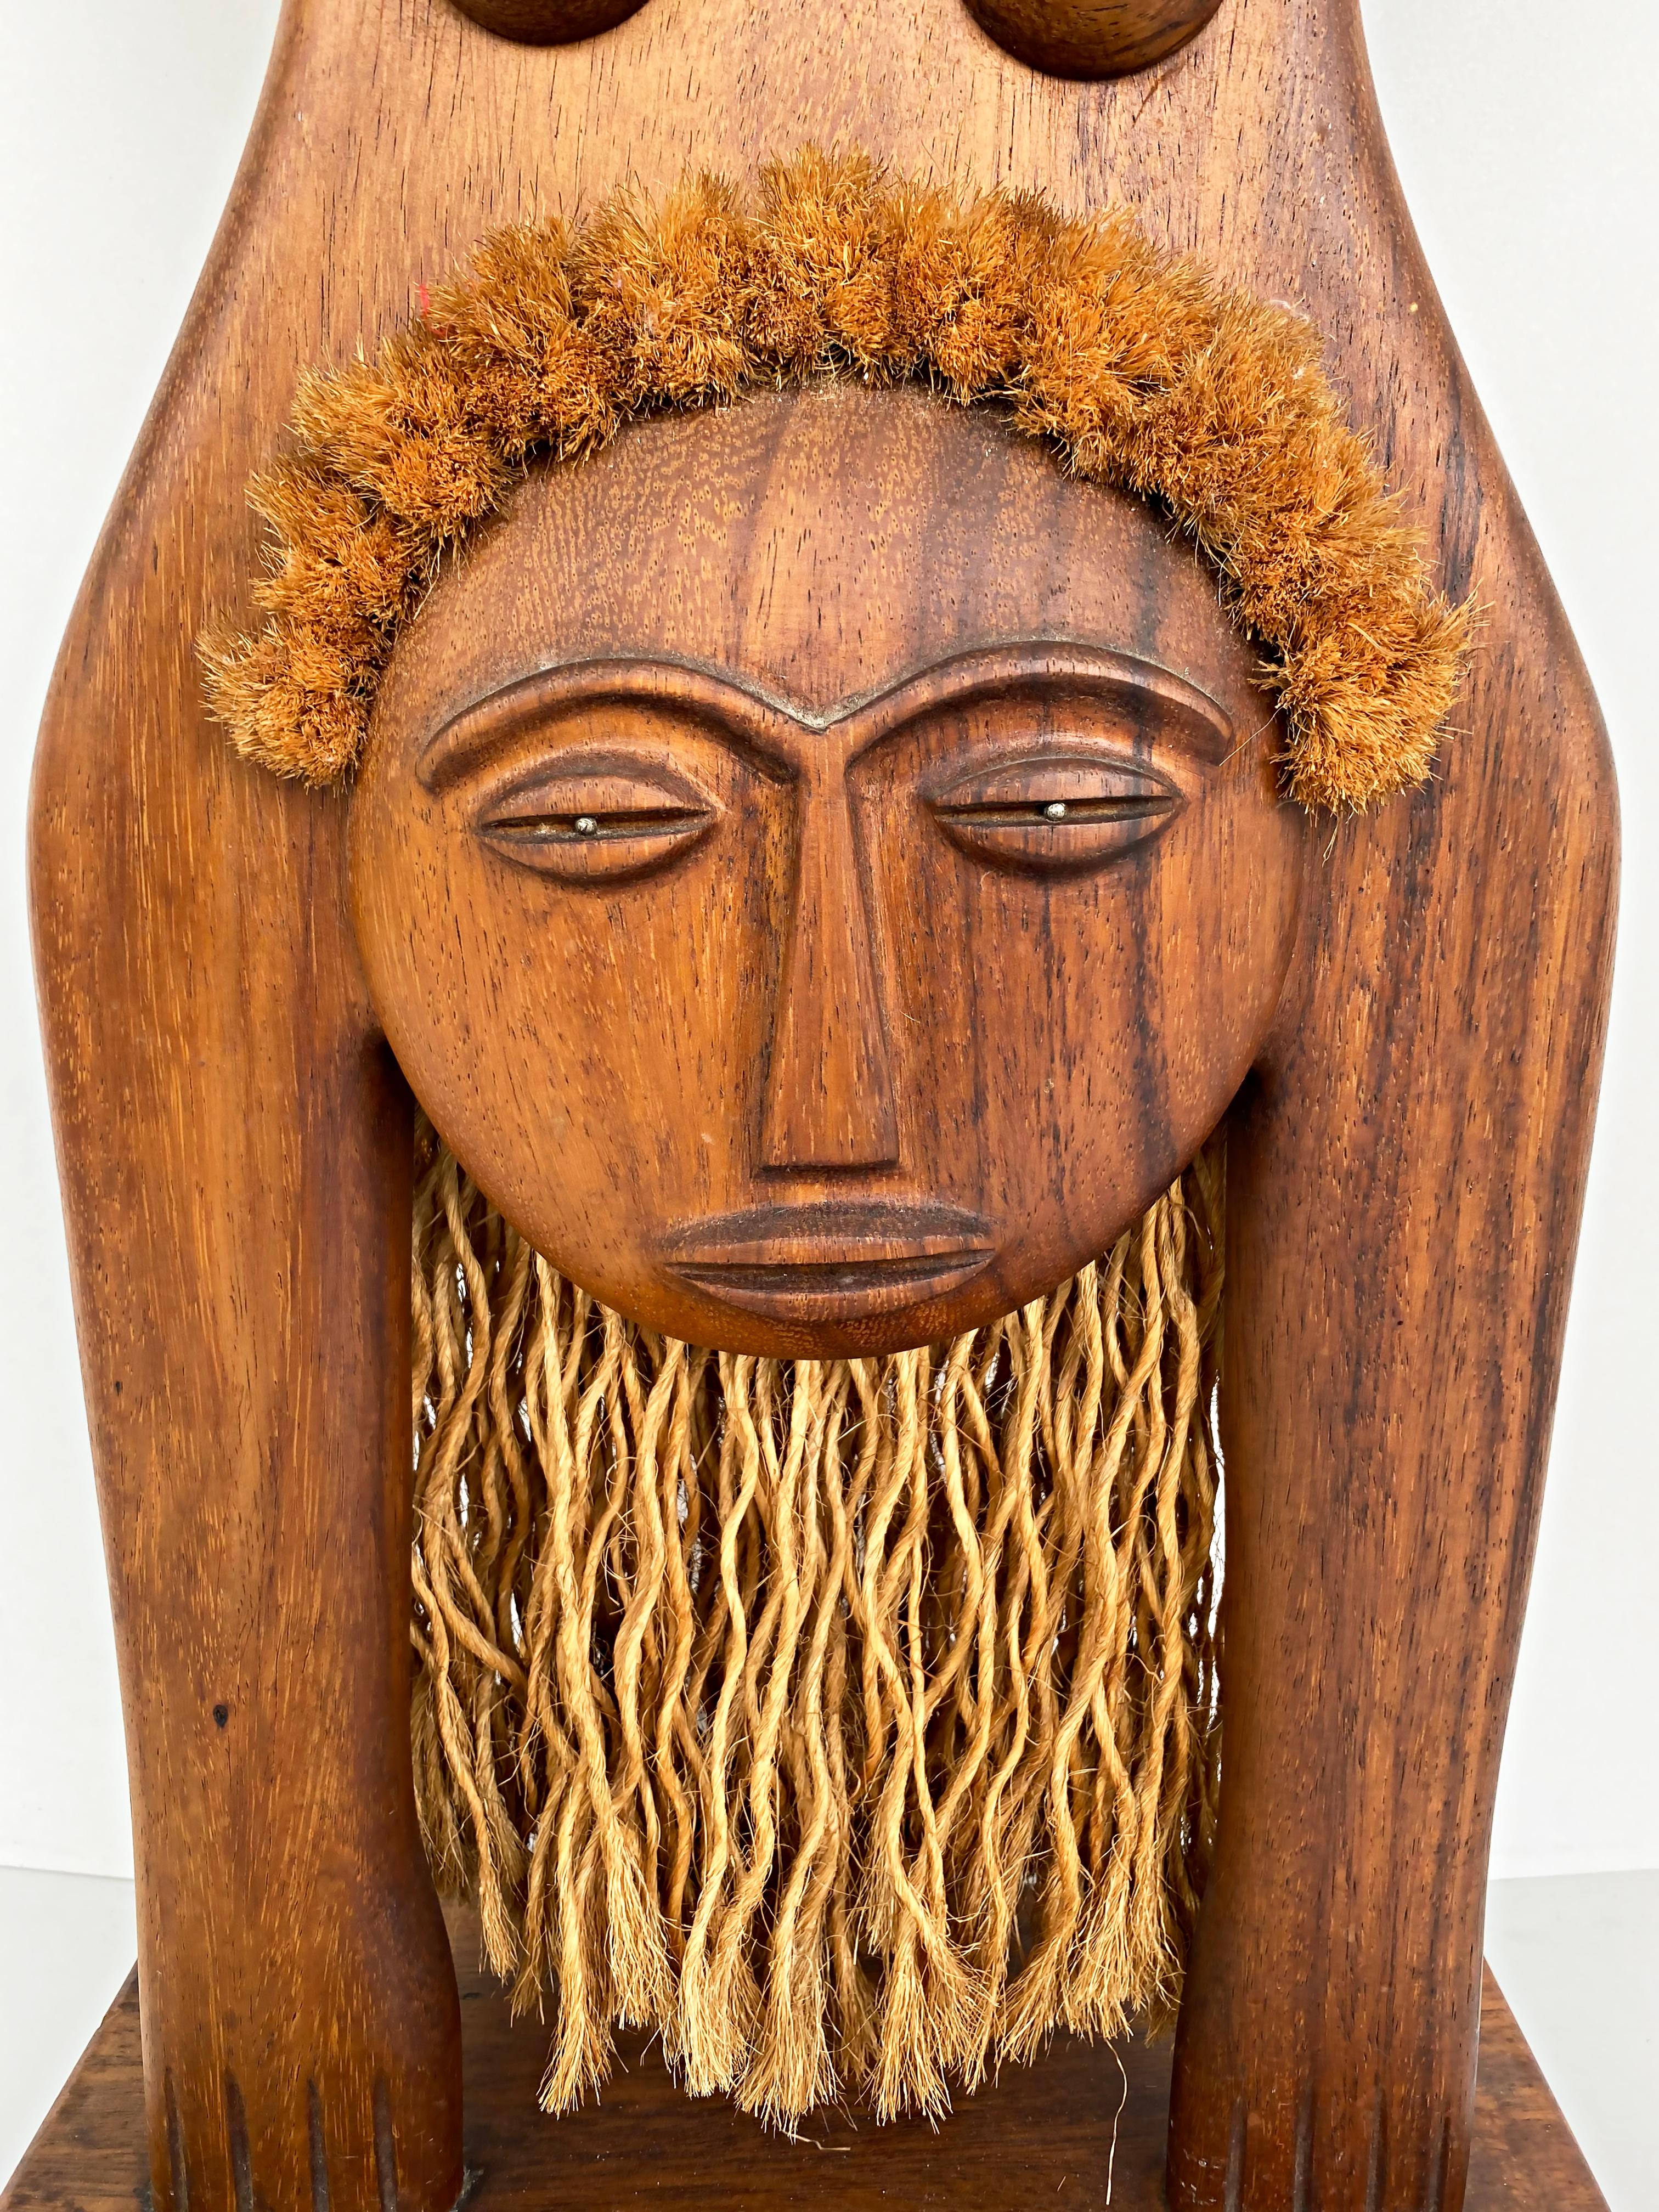 1978 carved wood fertility sculpture by Edwin Scheier, Signed 


Offered for sale is an untitled sculpture by the listed American artist Edwin Scheier (1910-2008) constructed of Guanacaste hardwood and cord. This tall, hand-carved sculpture is